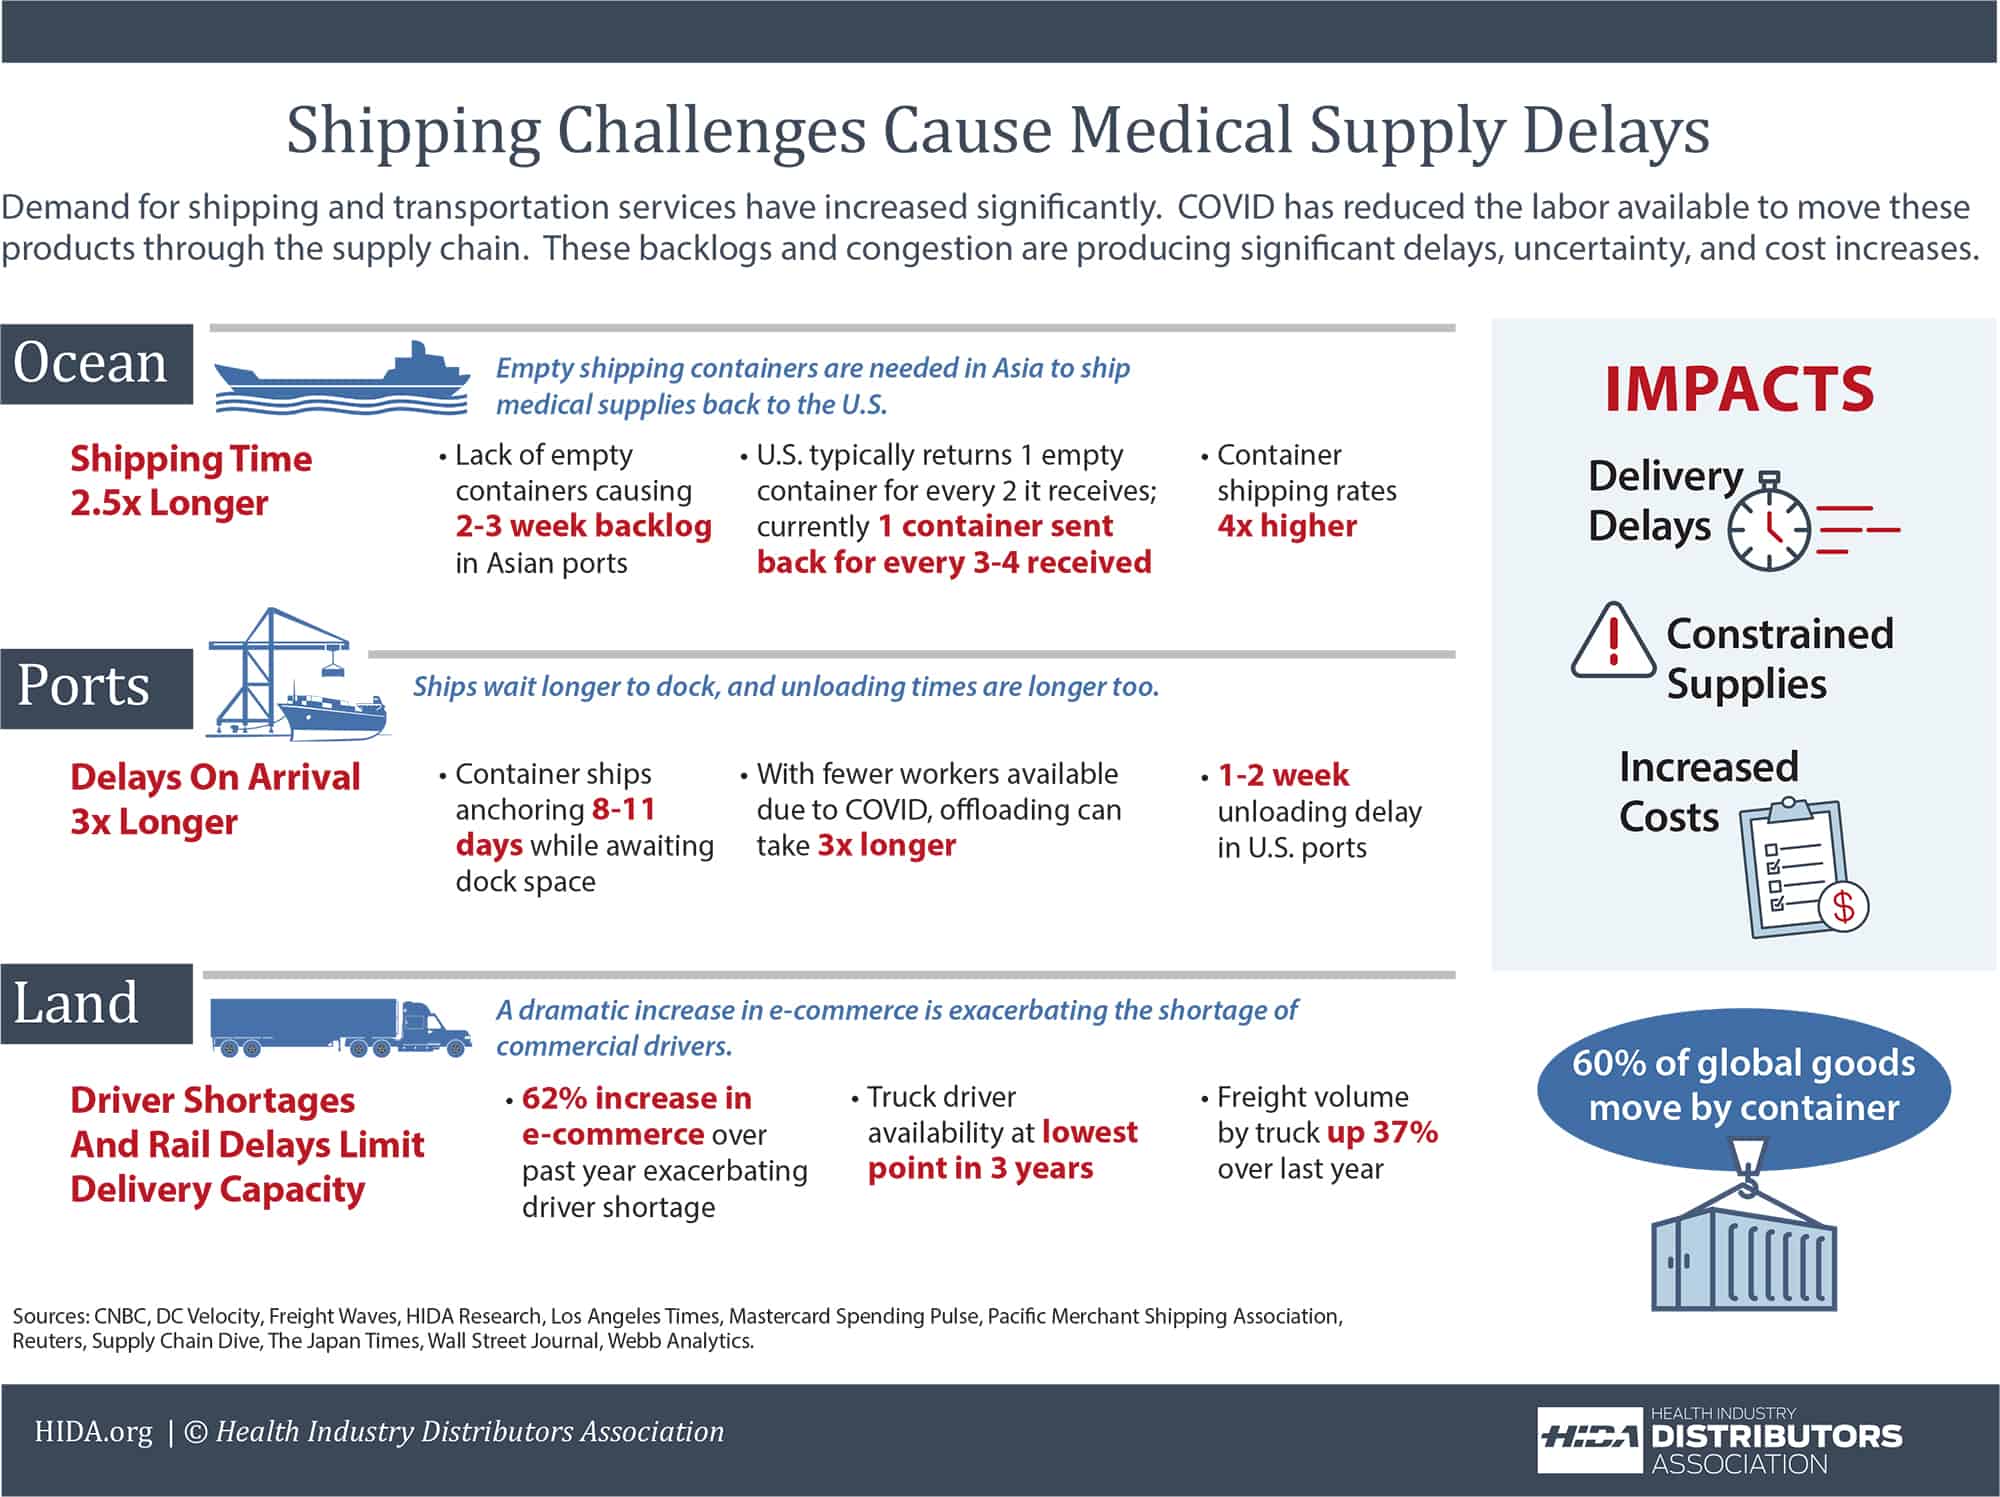 Infographic: Shipping Challenges Cause Medical Supply Delays. (Please enable images to view.)